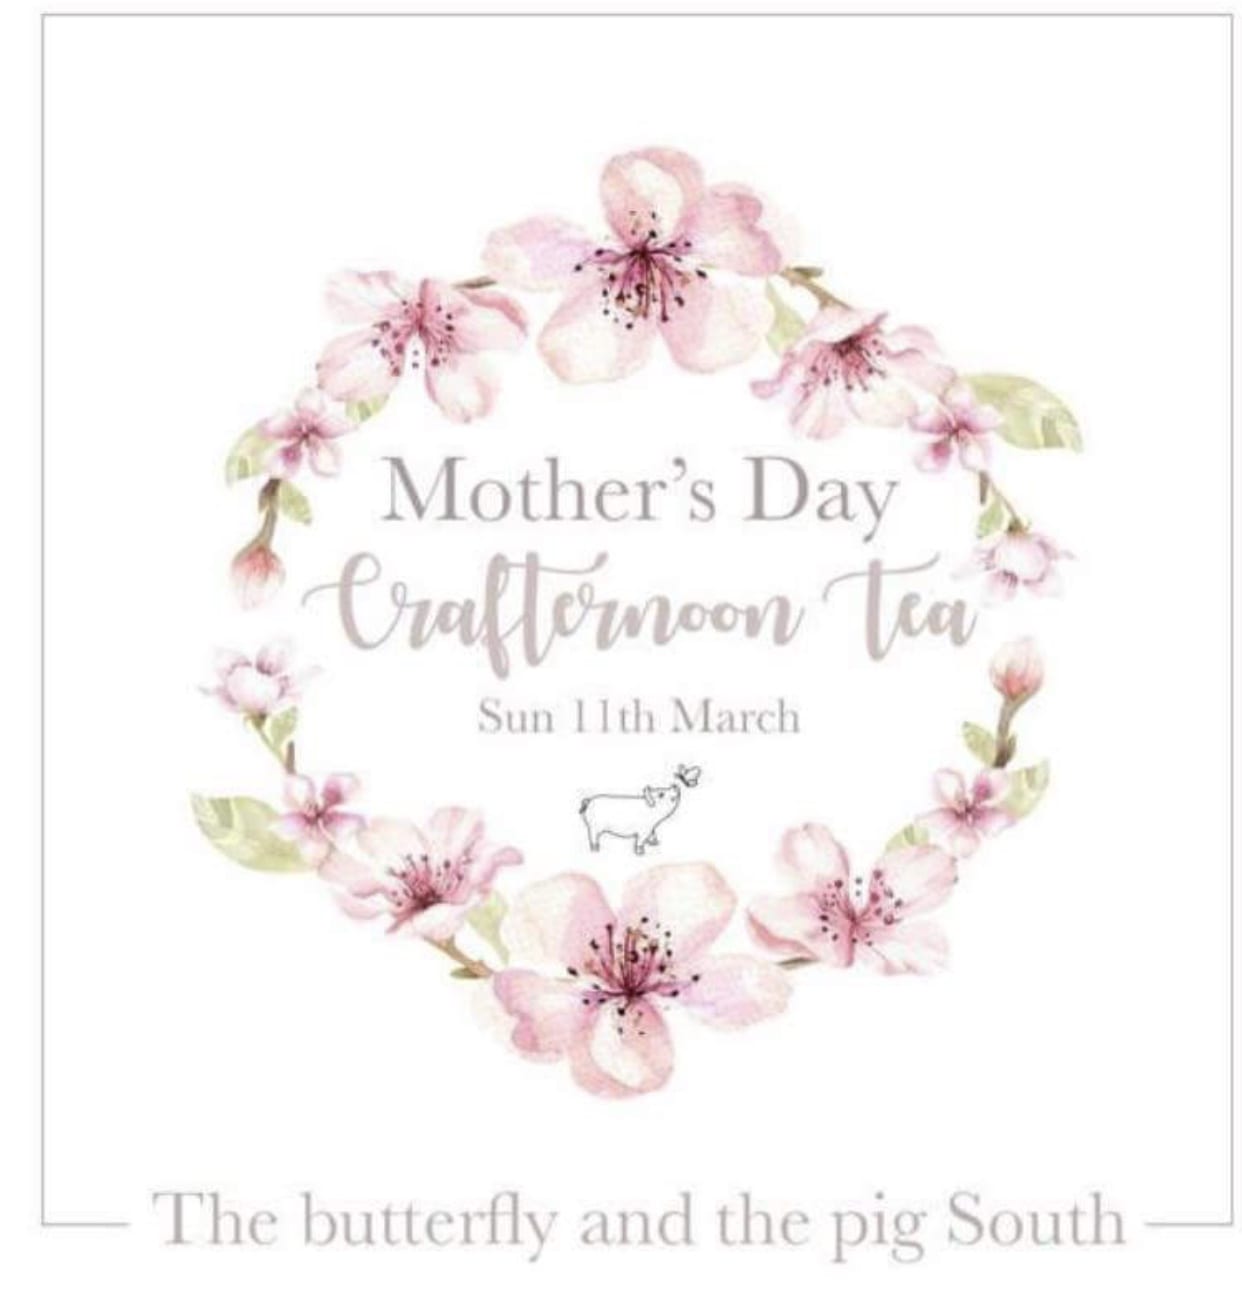 Foodie Explorers mother’s day glasgow the Butterfly and the pig south